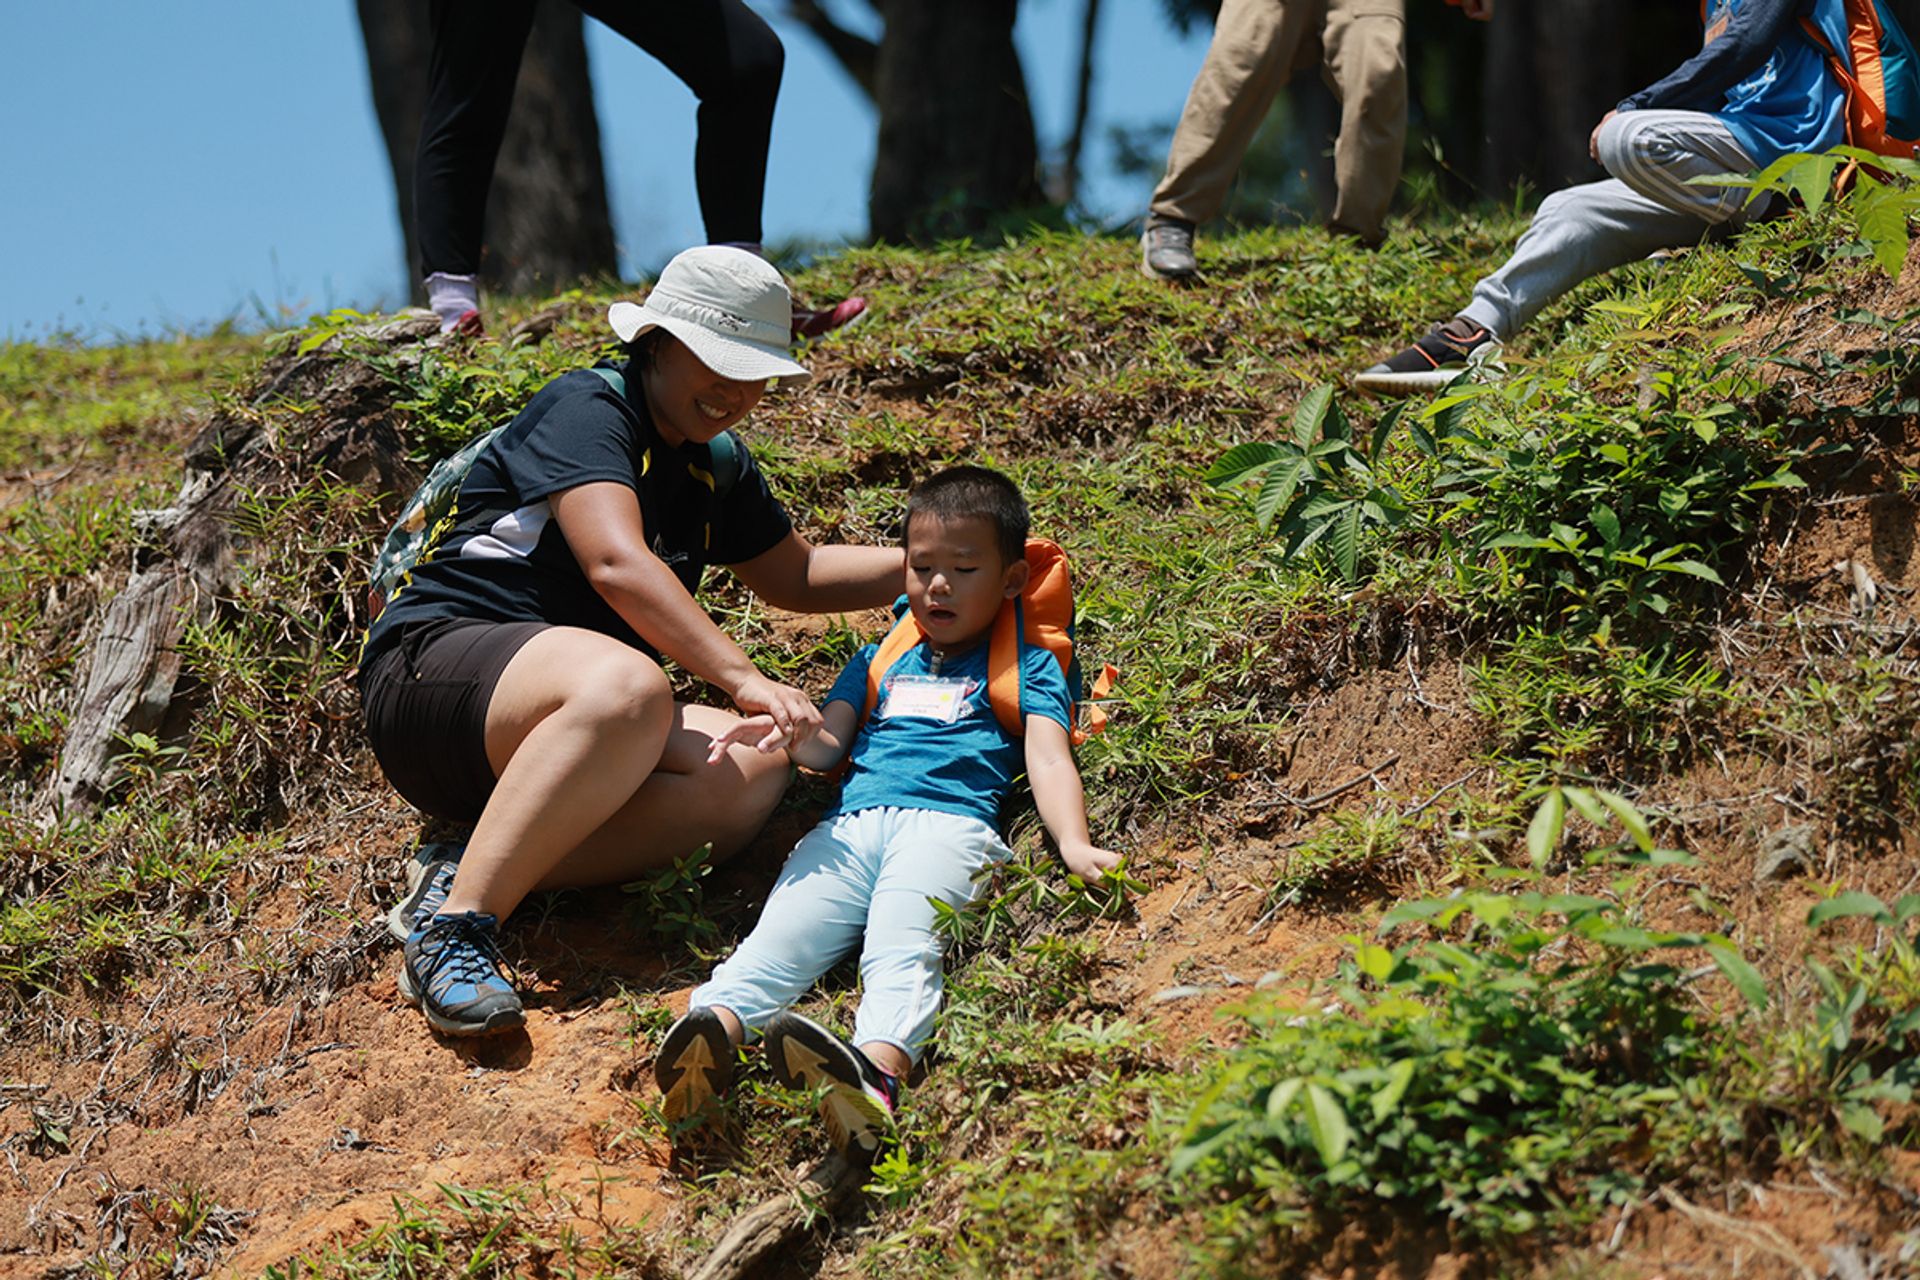 Lucas Li learns how to slide down a slope safely, with the assistance of volunteer Ng Yimin, 38.